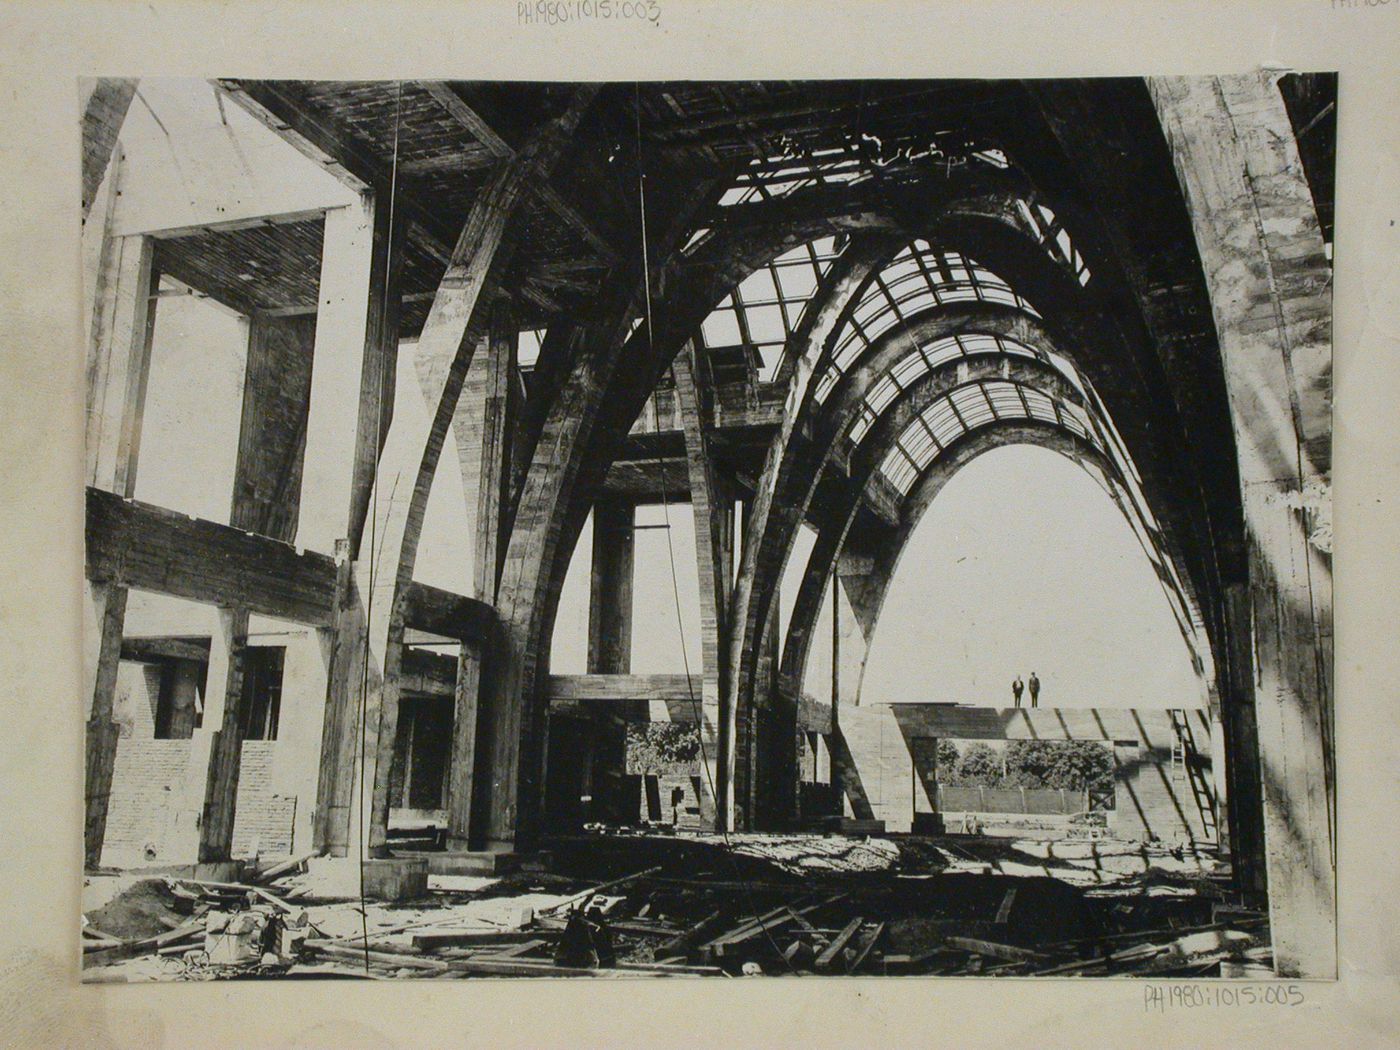 View of the Central Palace for the Exhibition of Contemporary Culture under construction, Brno, Czechoslovakia (now Czech Republic)